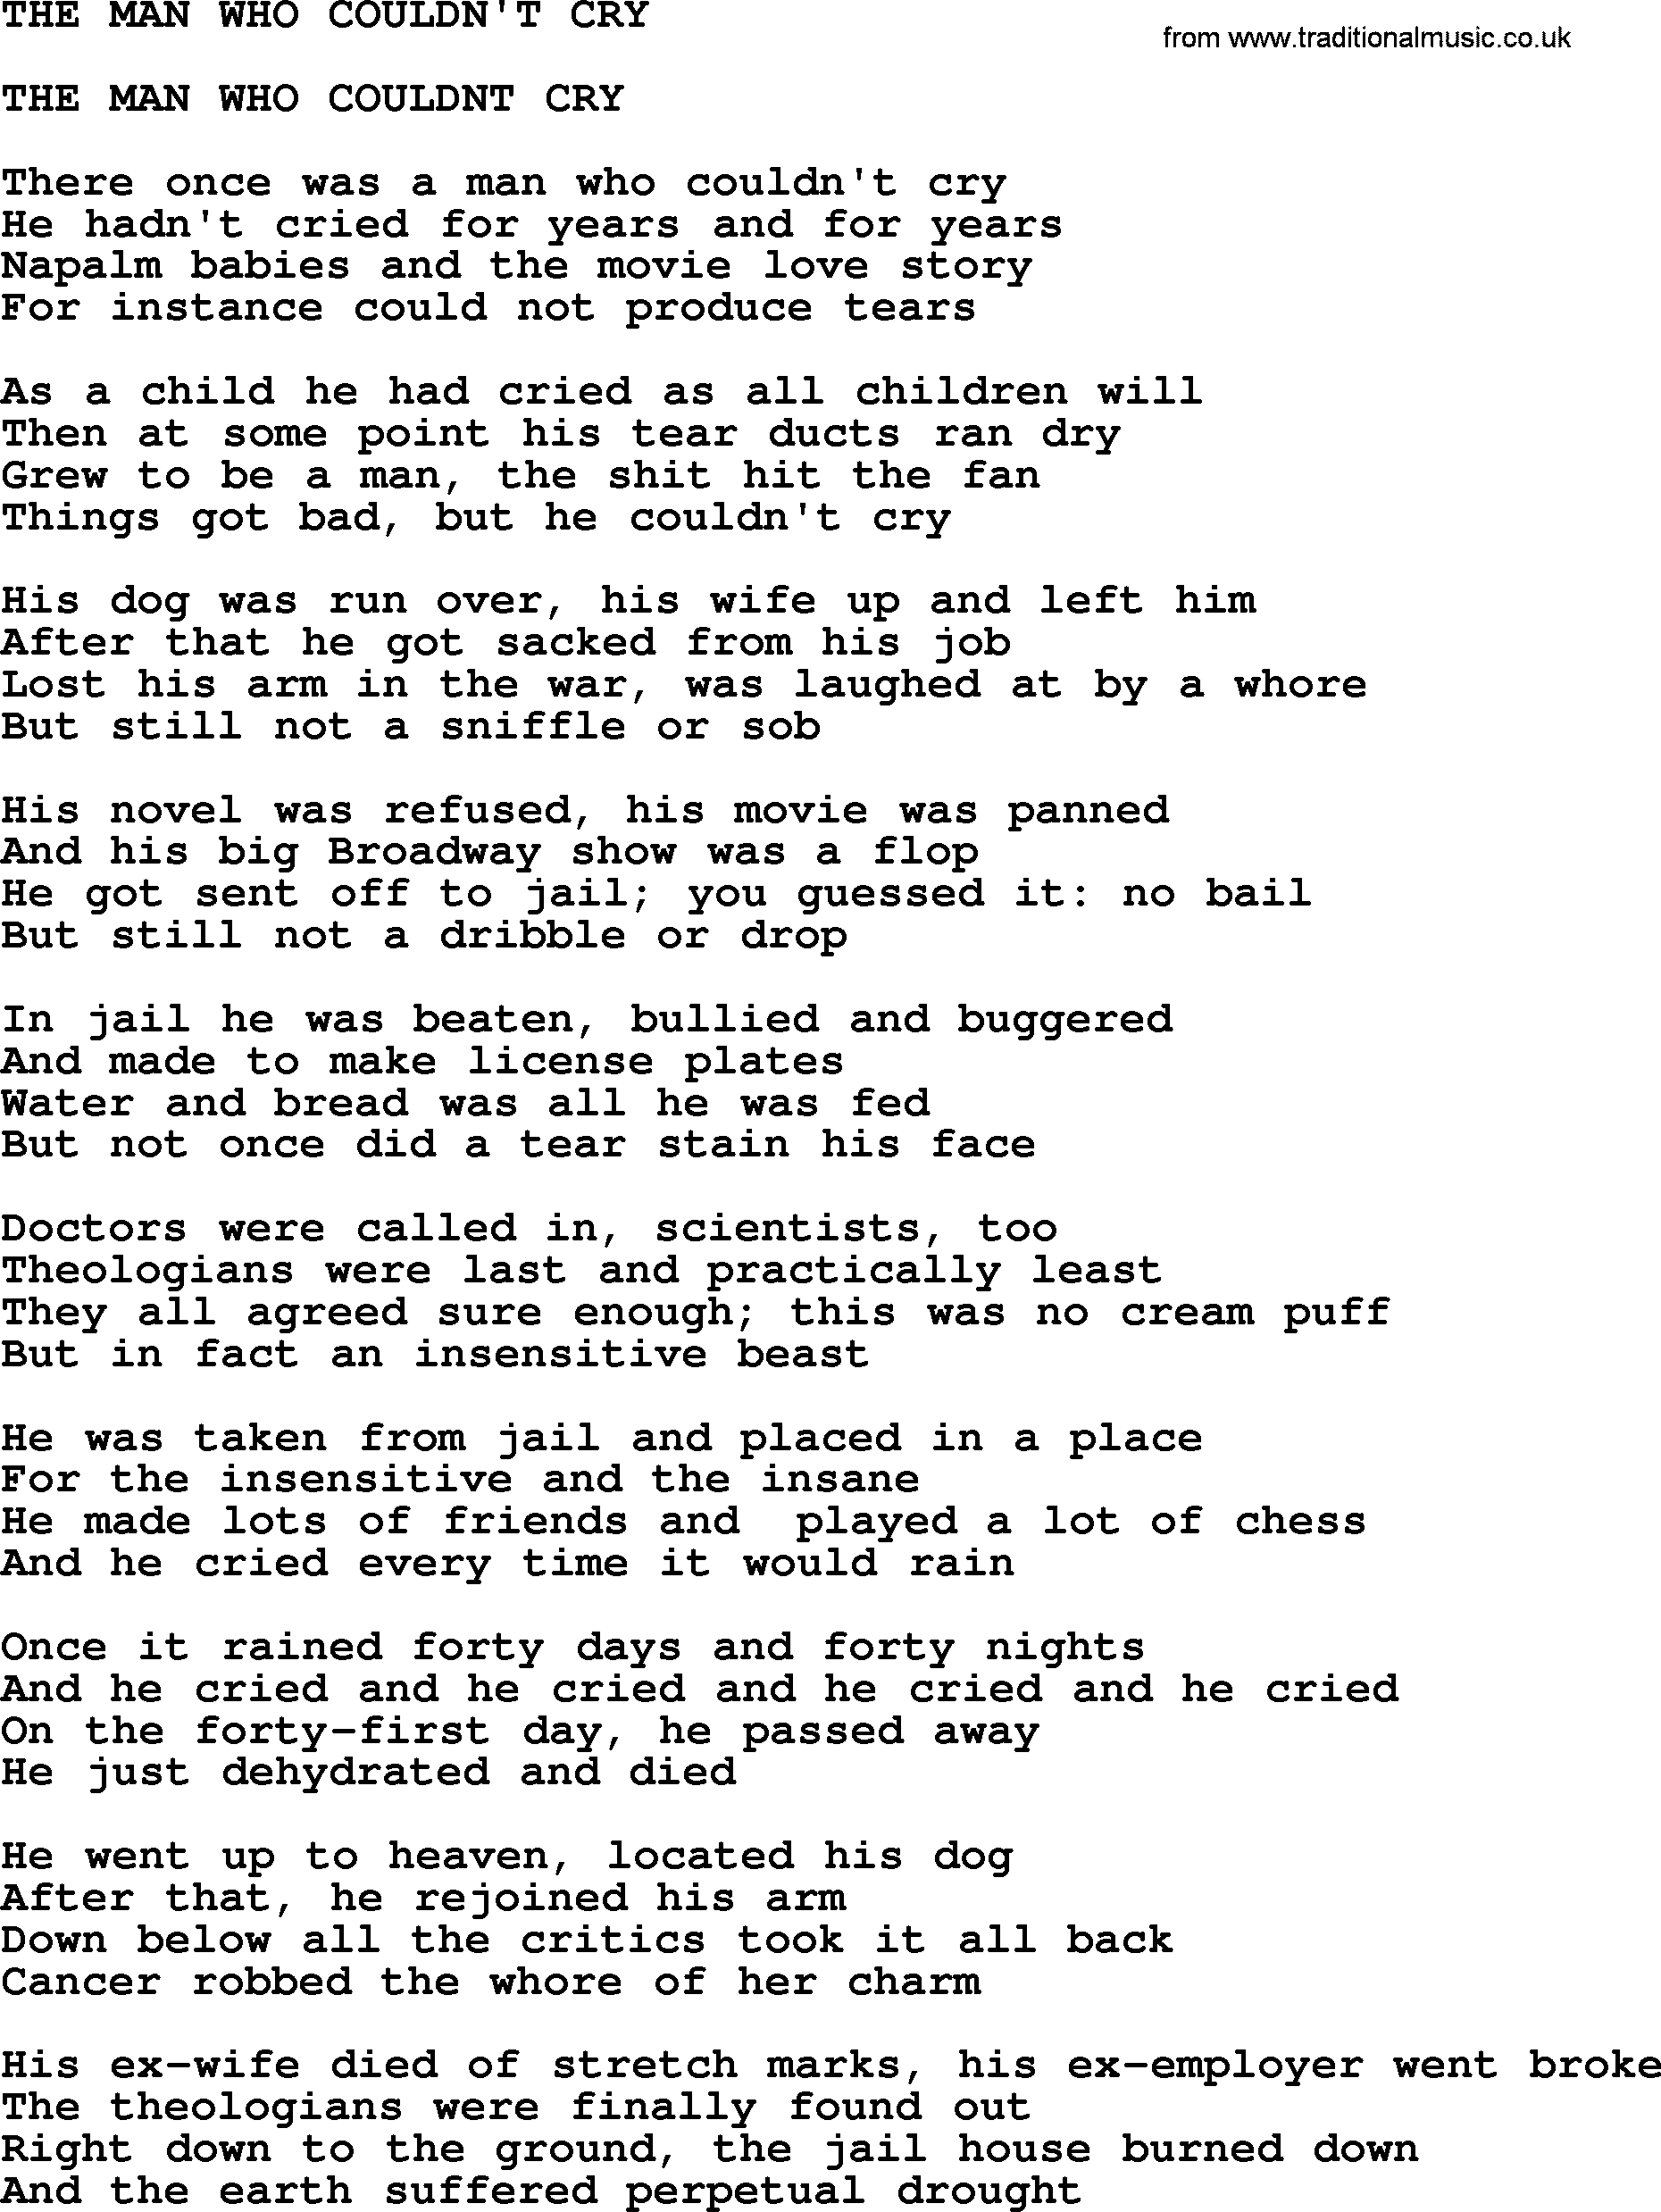 Johnny Cash song The Man Who Couldn't Cry.txt lyrics